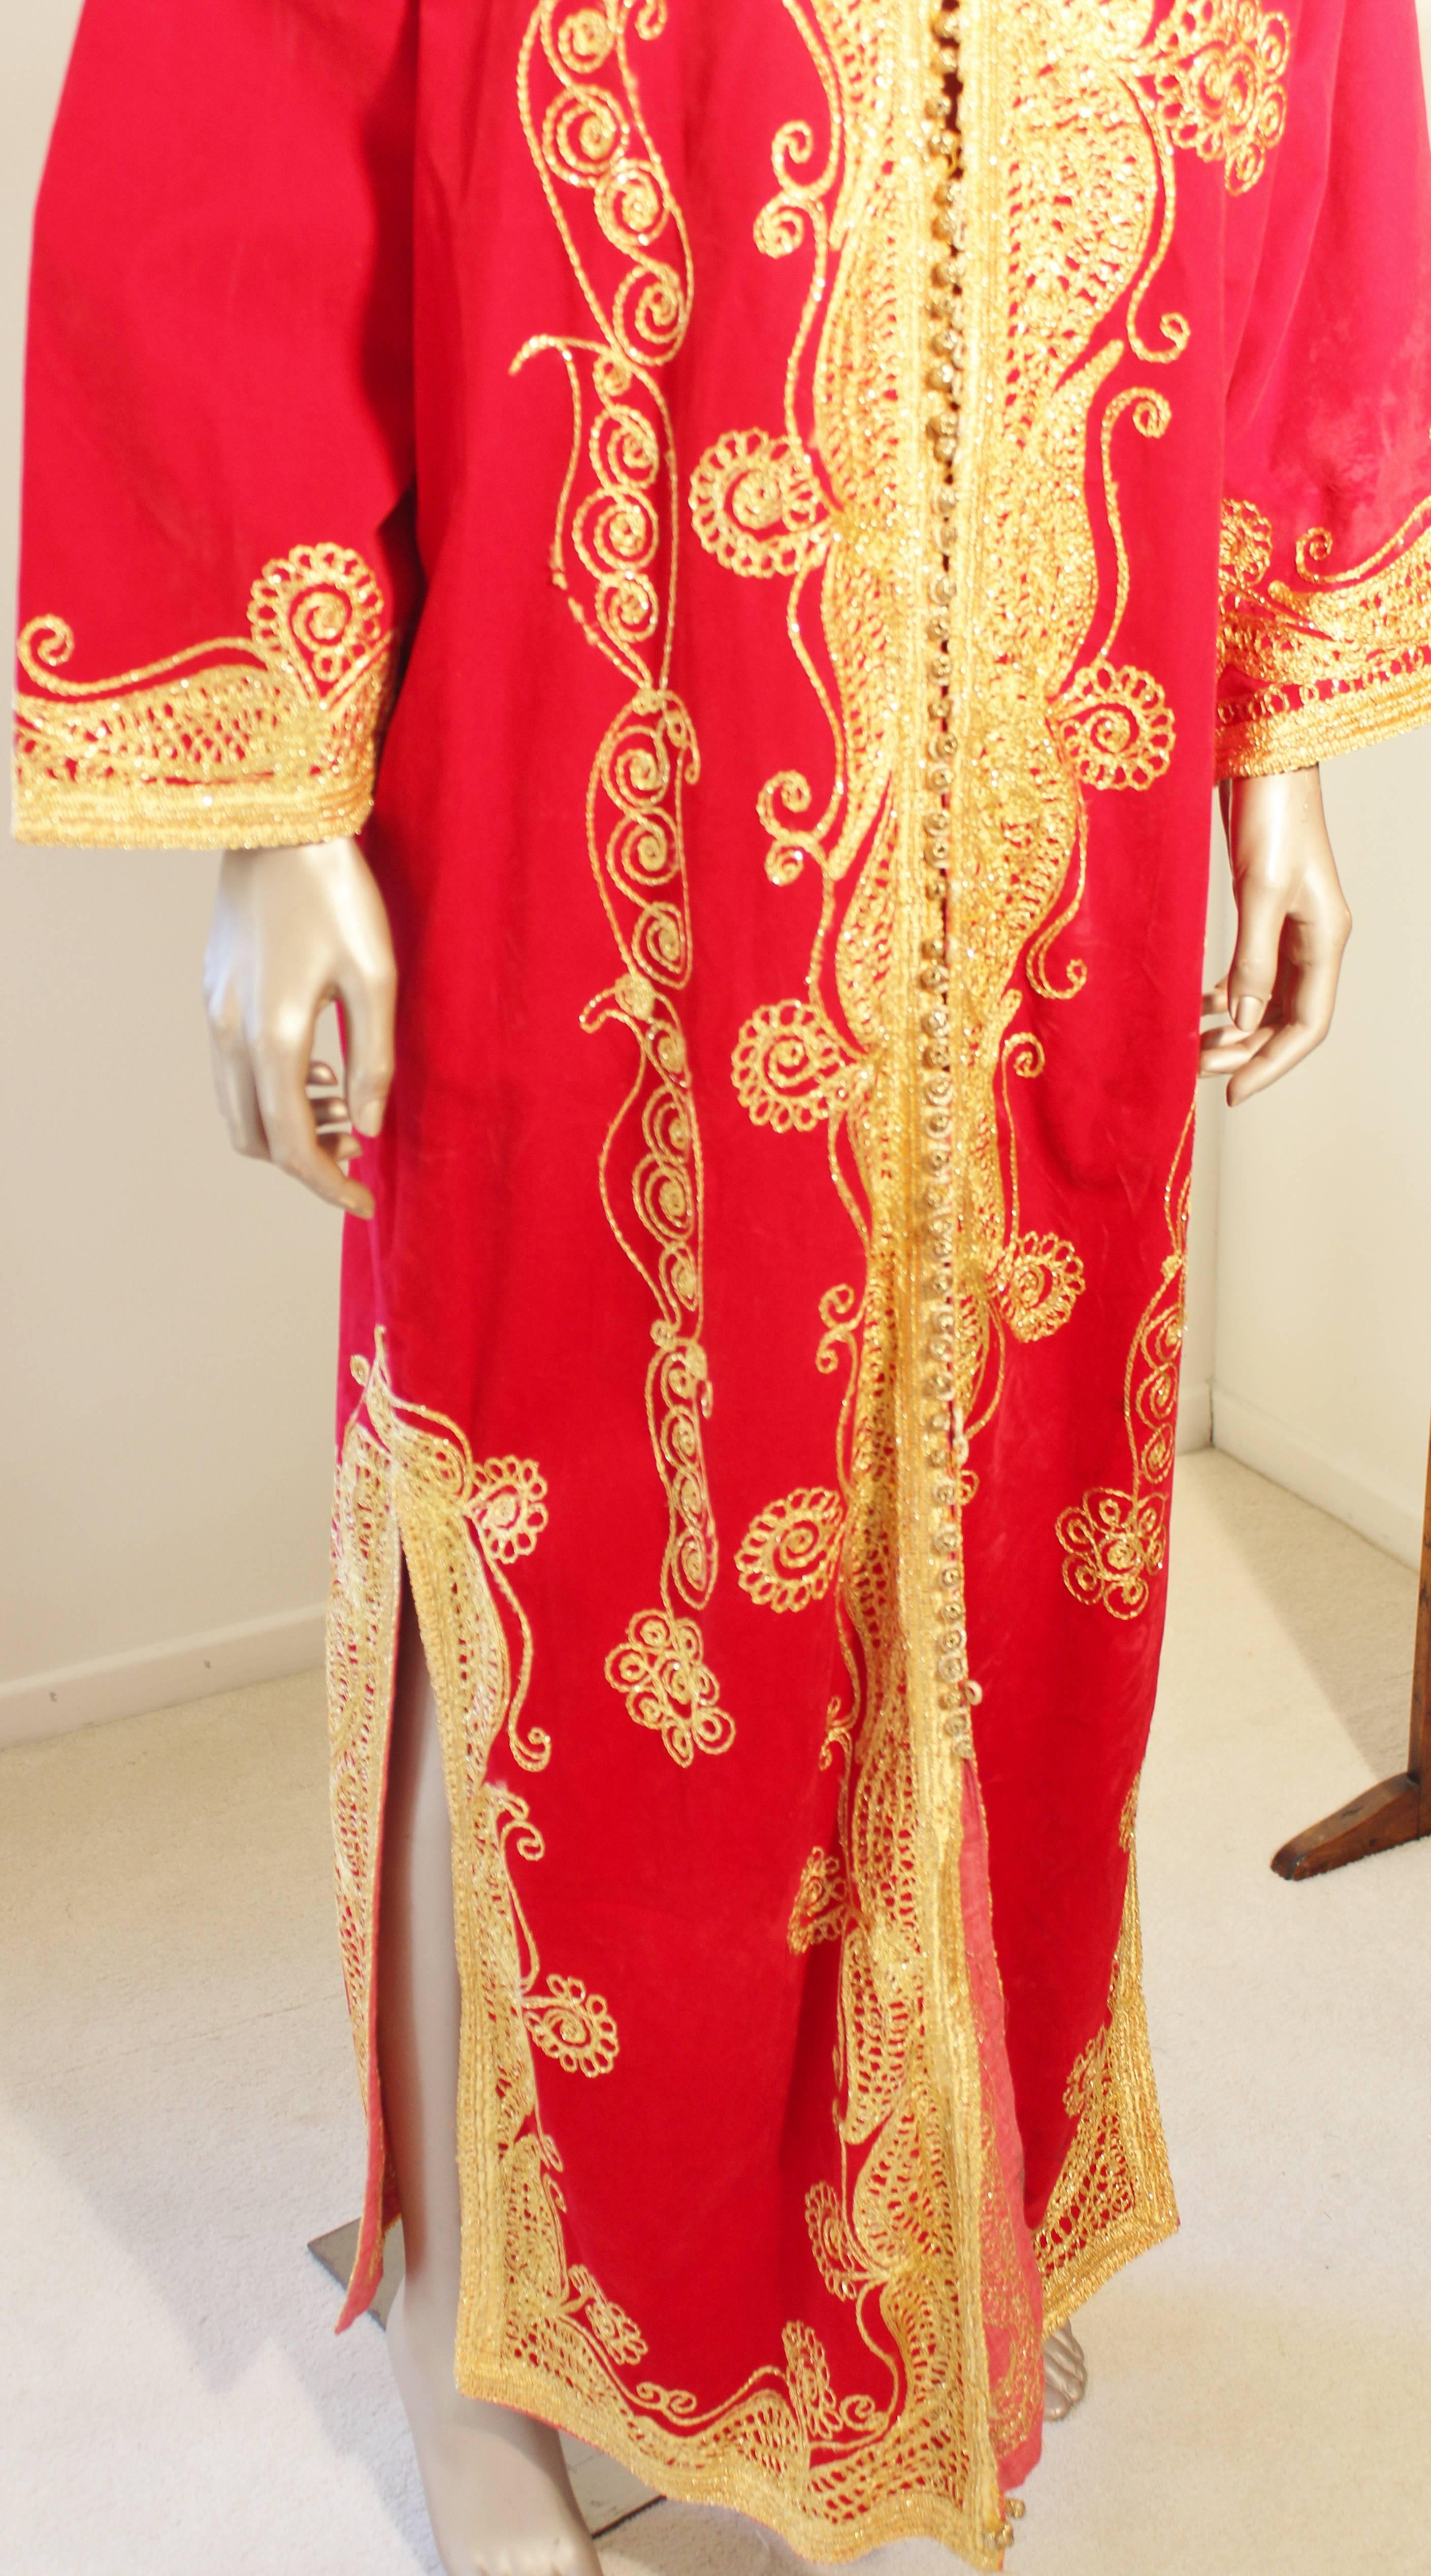 Vintage Moroccan red velvet and gold embroidered caftan.
Elegant vintage Moroccan kaftan, embroidered with Turkish gold threads design all-over. 
This style of caftan is unisex.
This red color velvet ceremonial kaftan is embroidered with gold